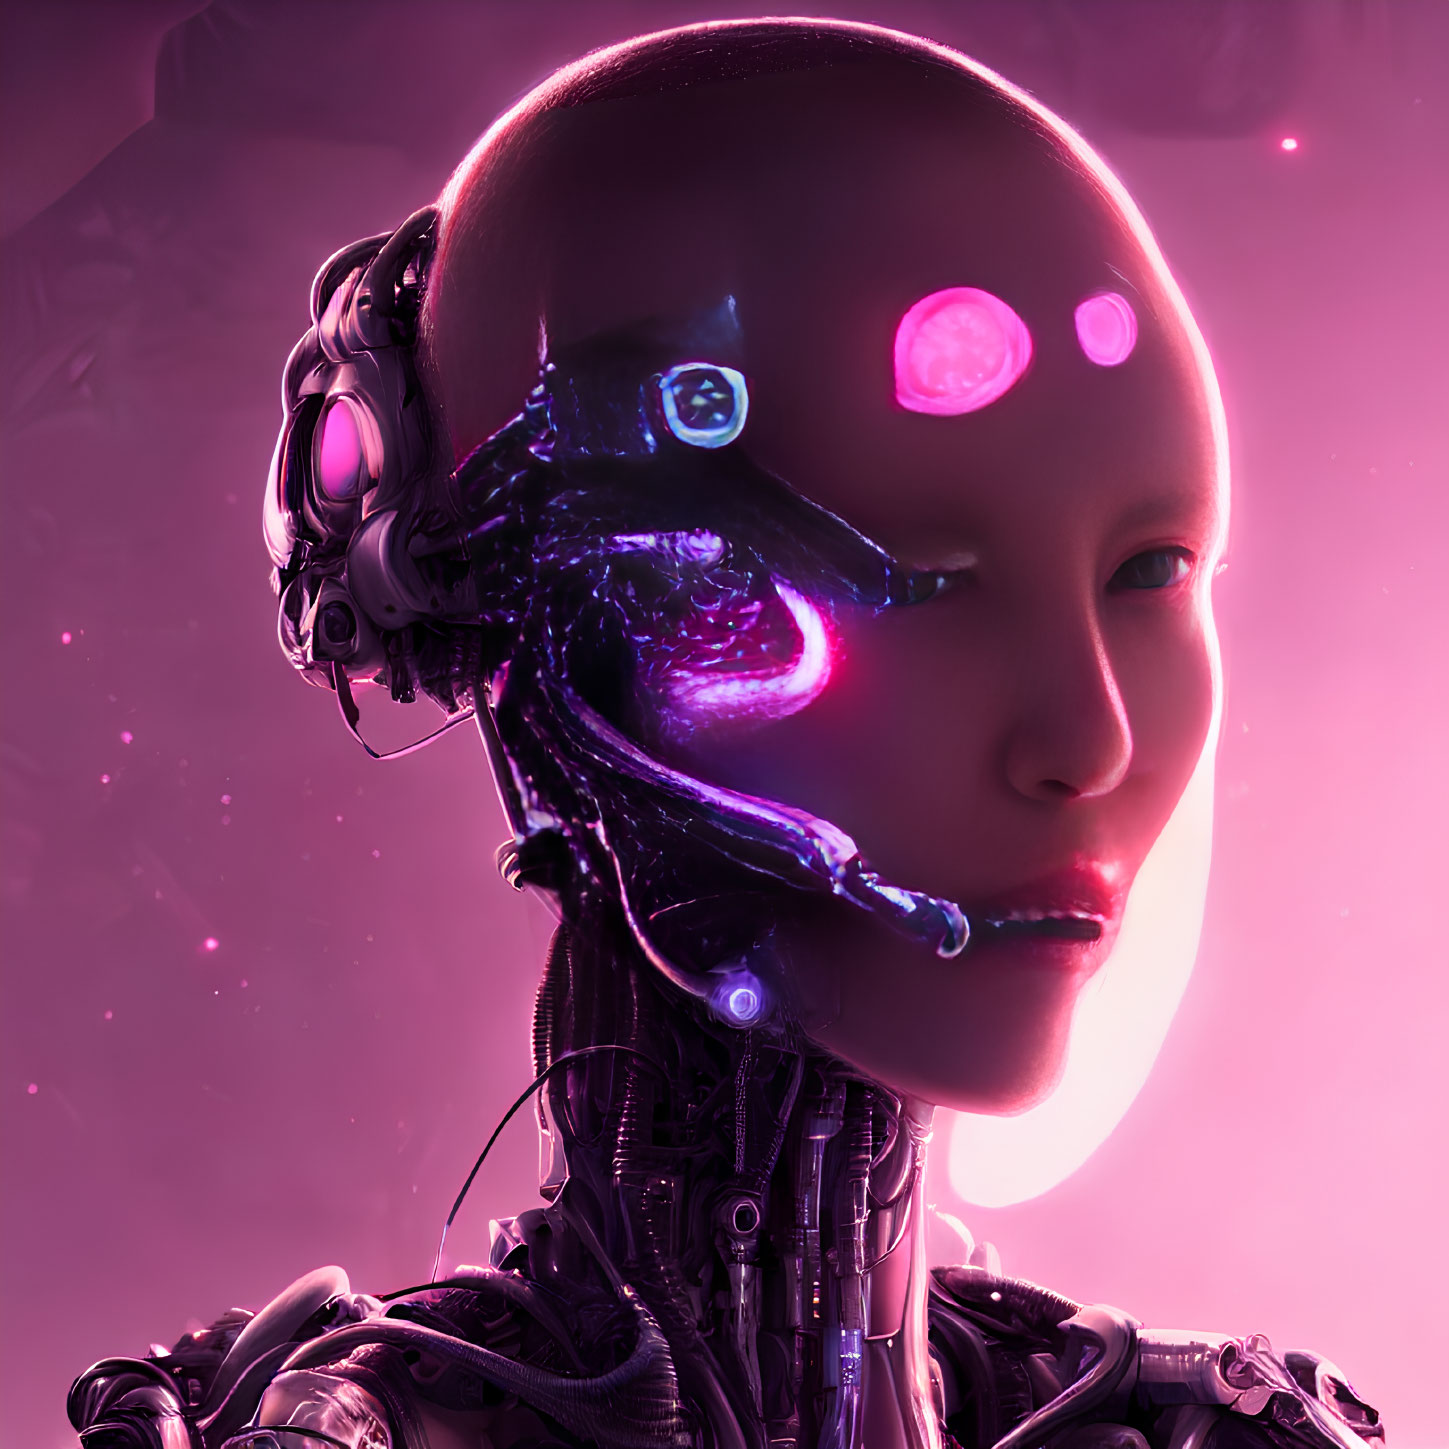 Detailed Close-Up of Cyborg with Human-Like Face and Pink Glowing Mechanical Elements